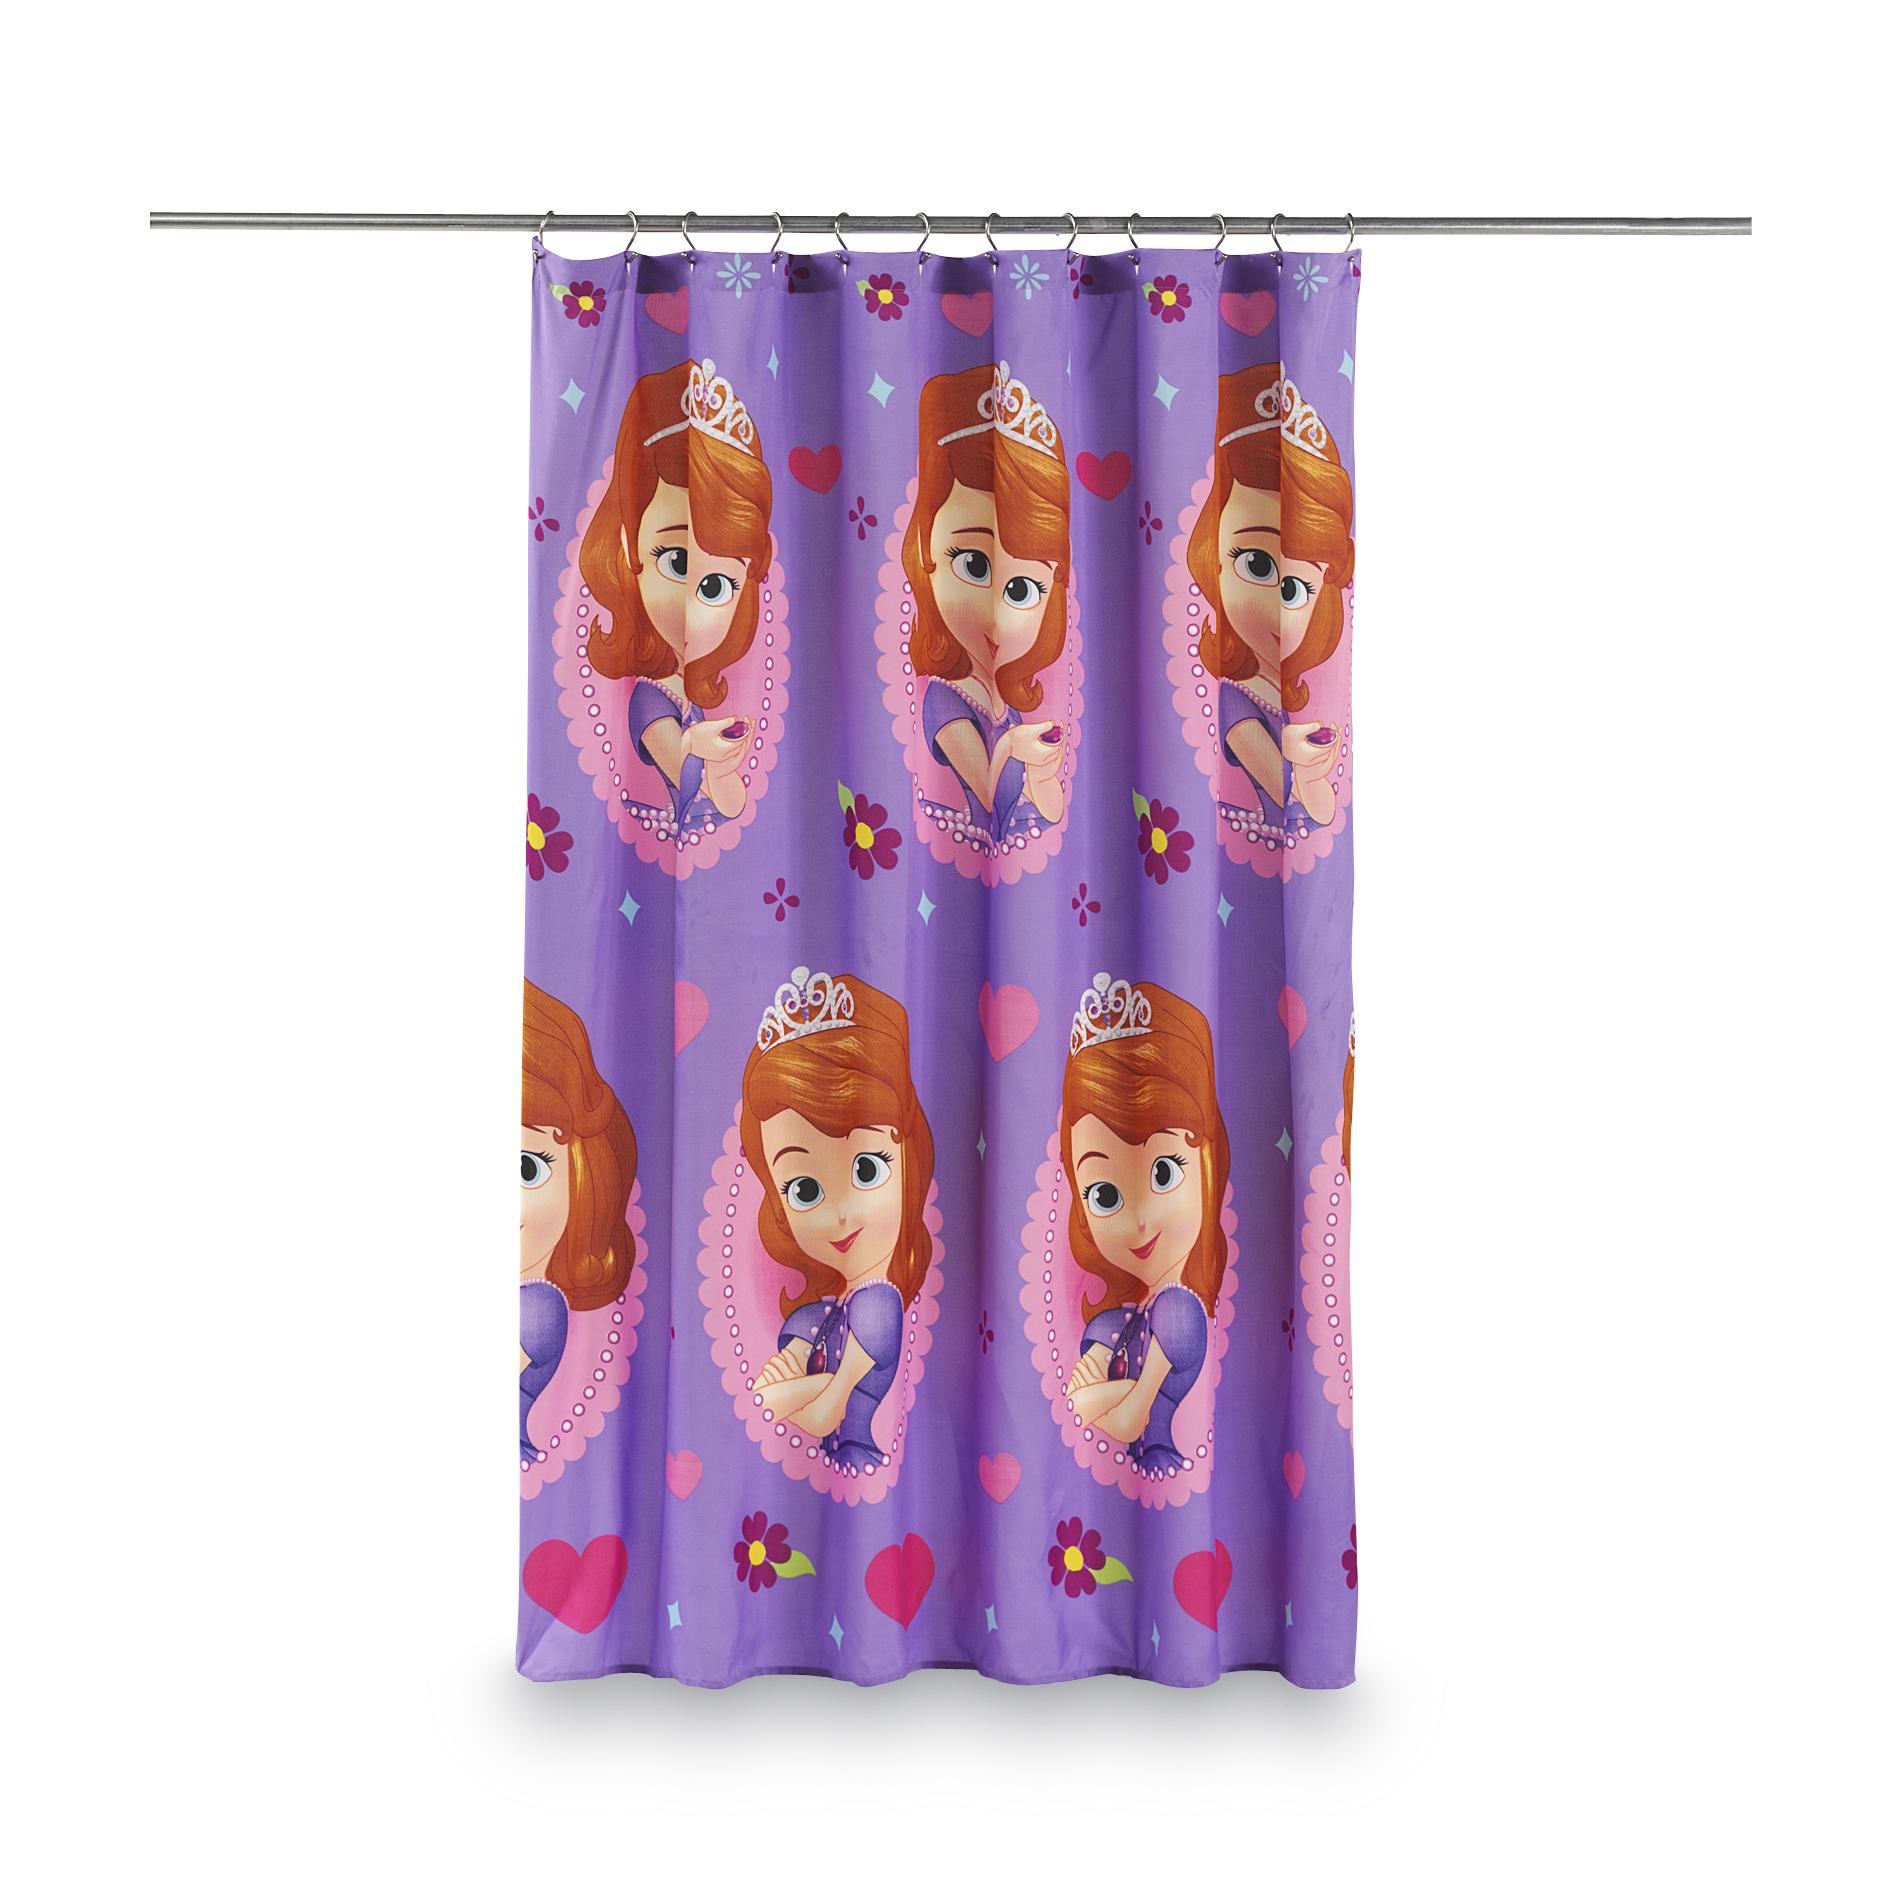 Shower Curtain And Matching Valance Kingdom Hearts Shower Curtain